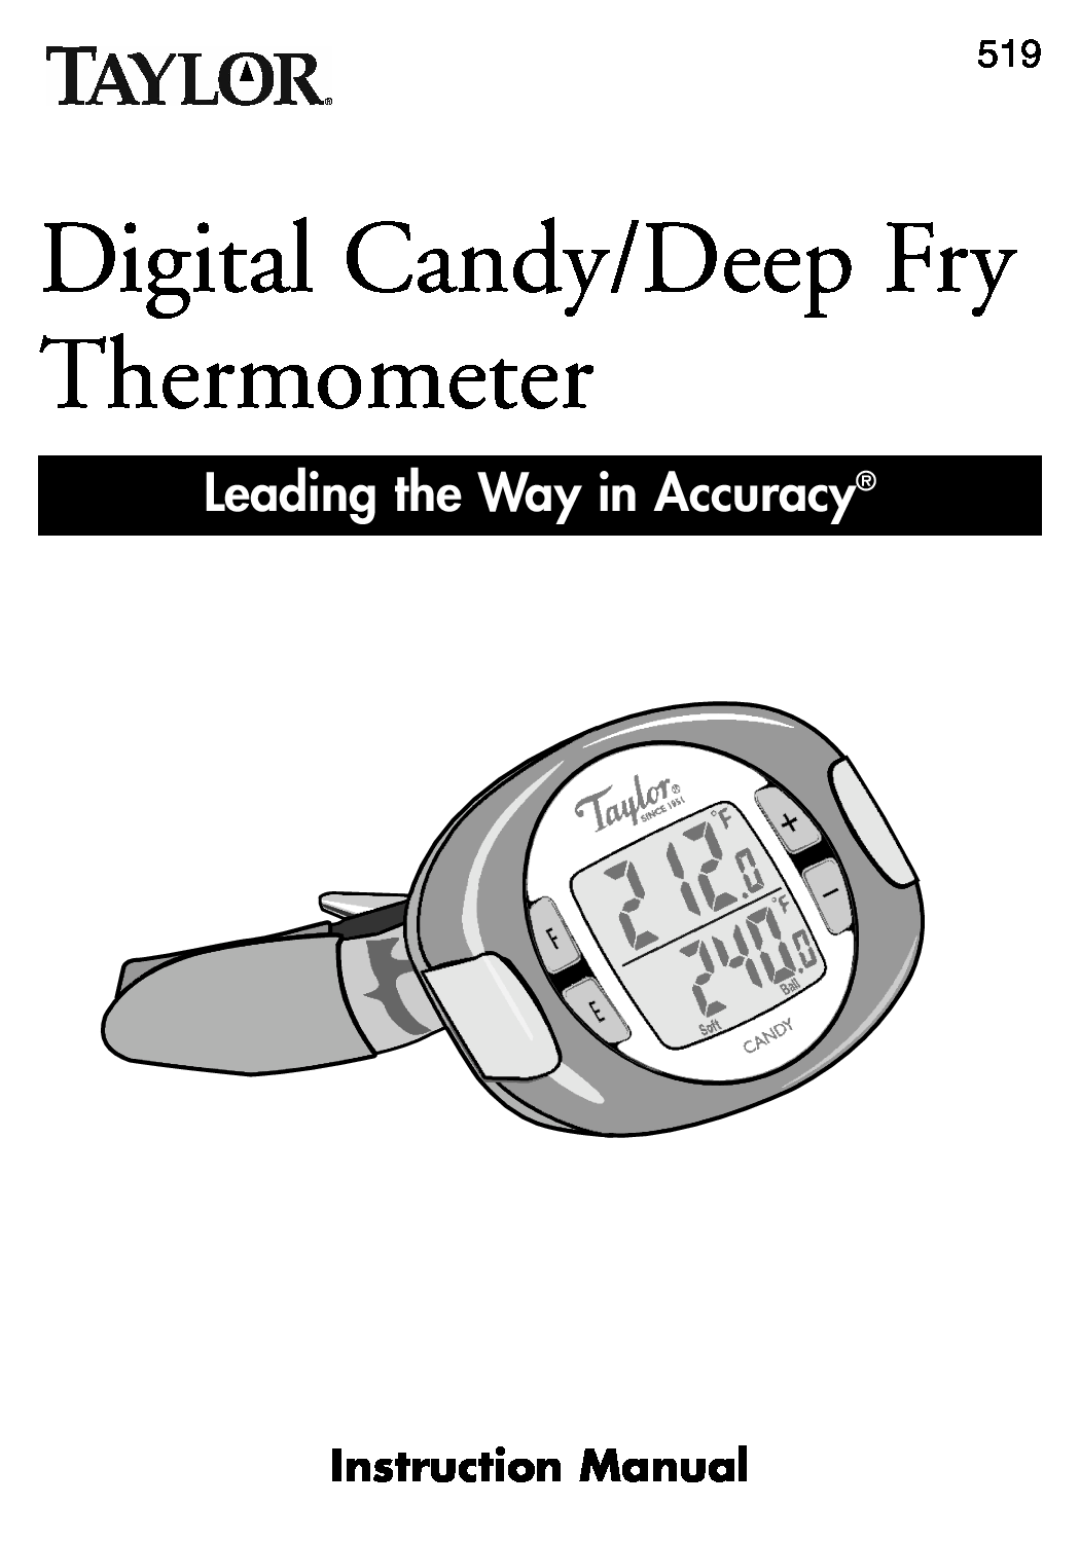 Taylor 519 instruction manual Leading the Way in Accuracy, Digital Candy/Deep Fry Thermometer 